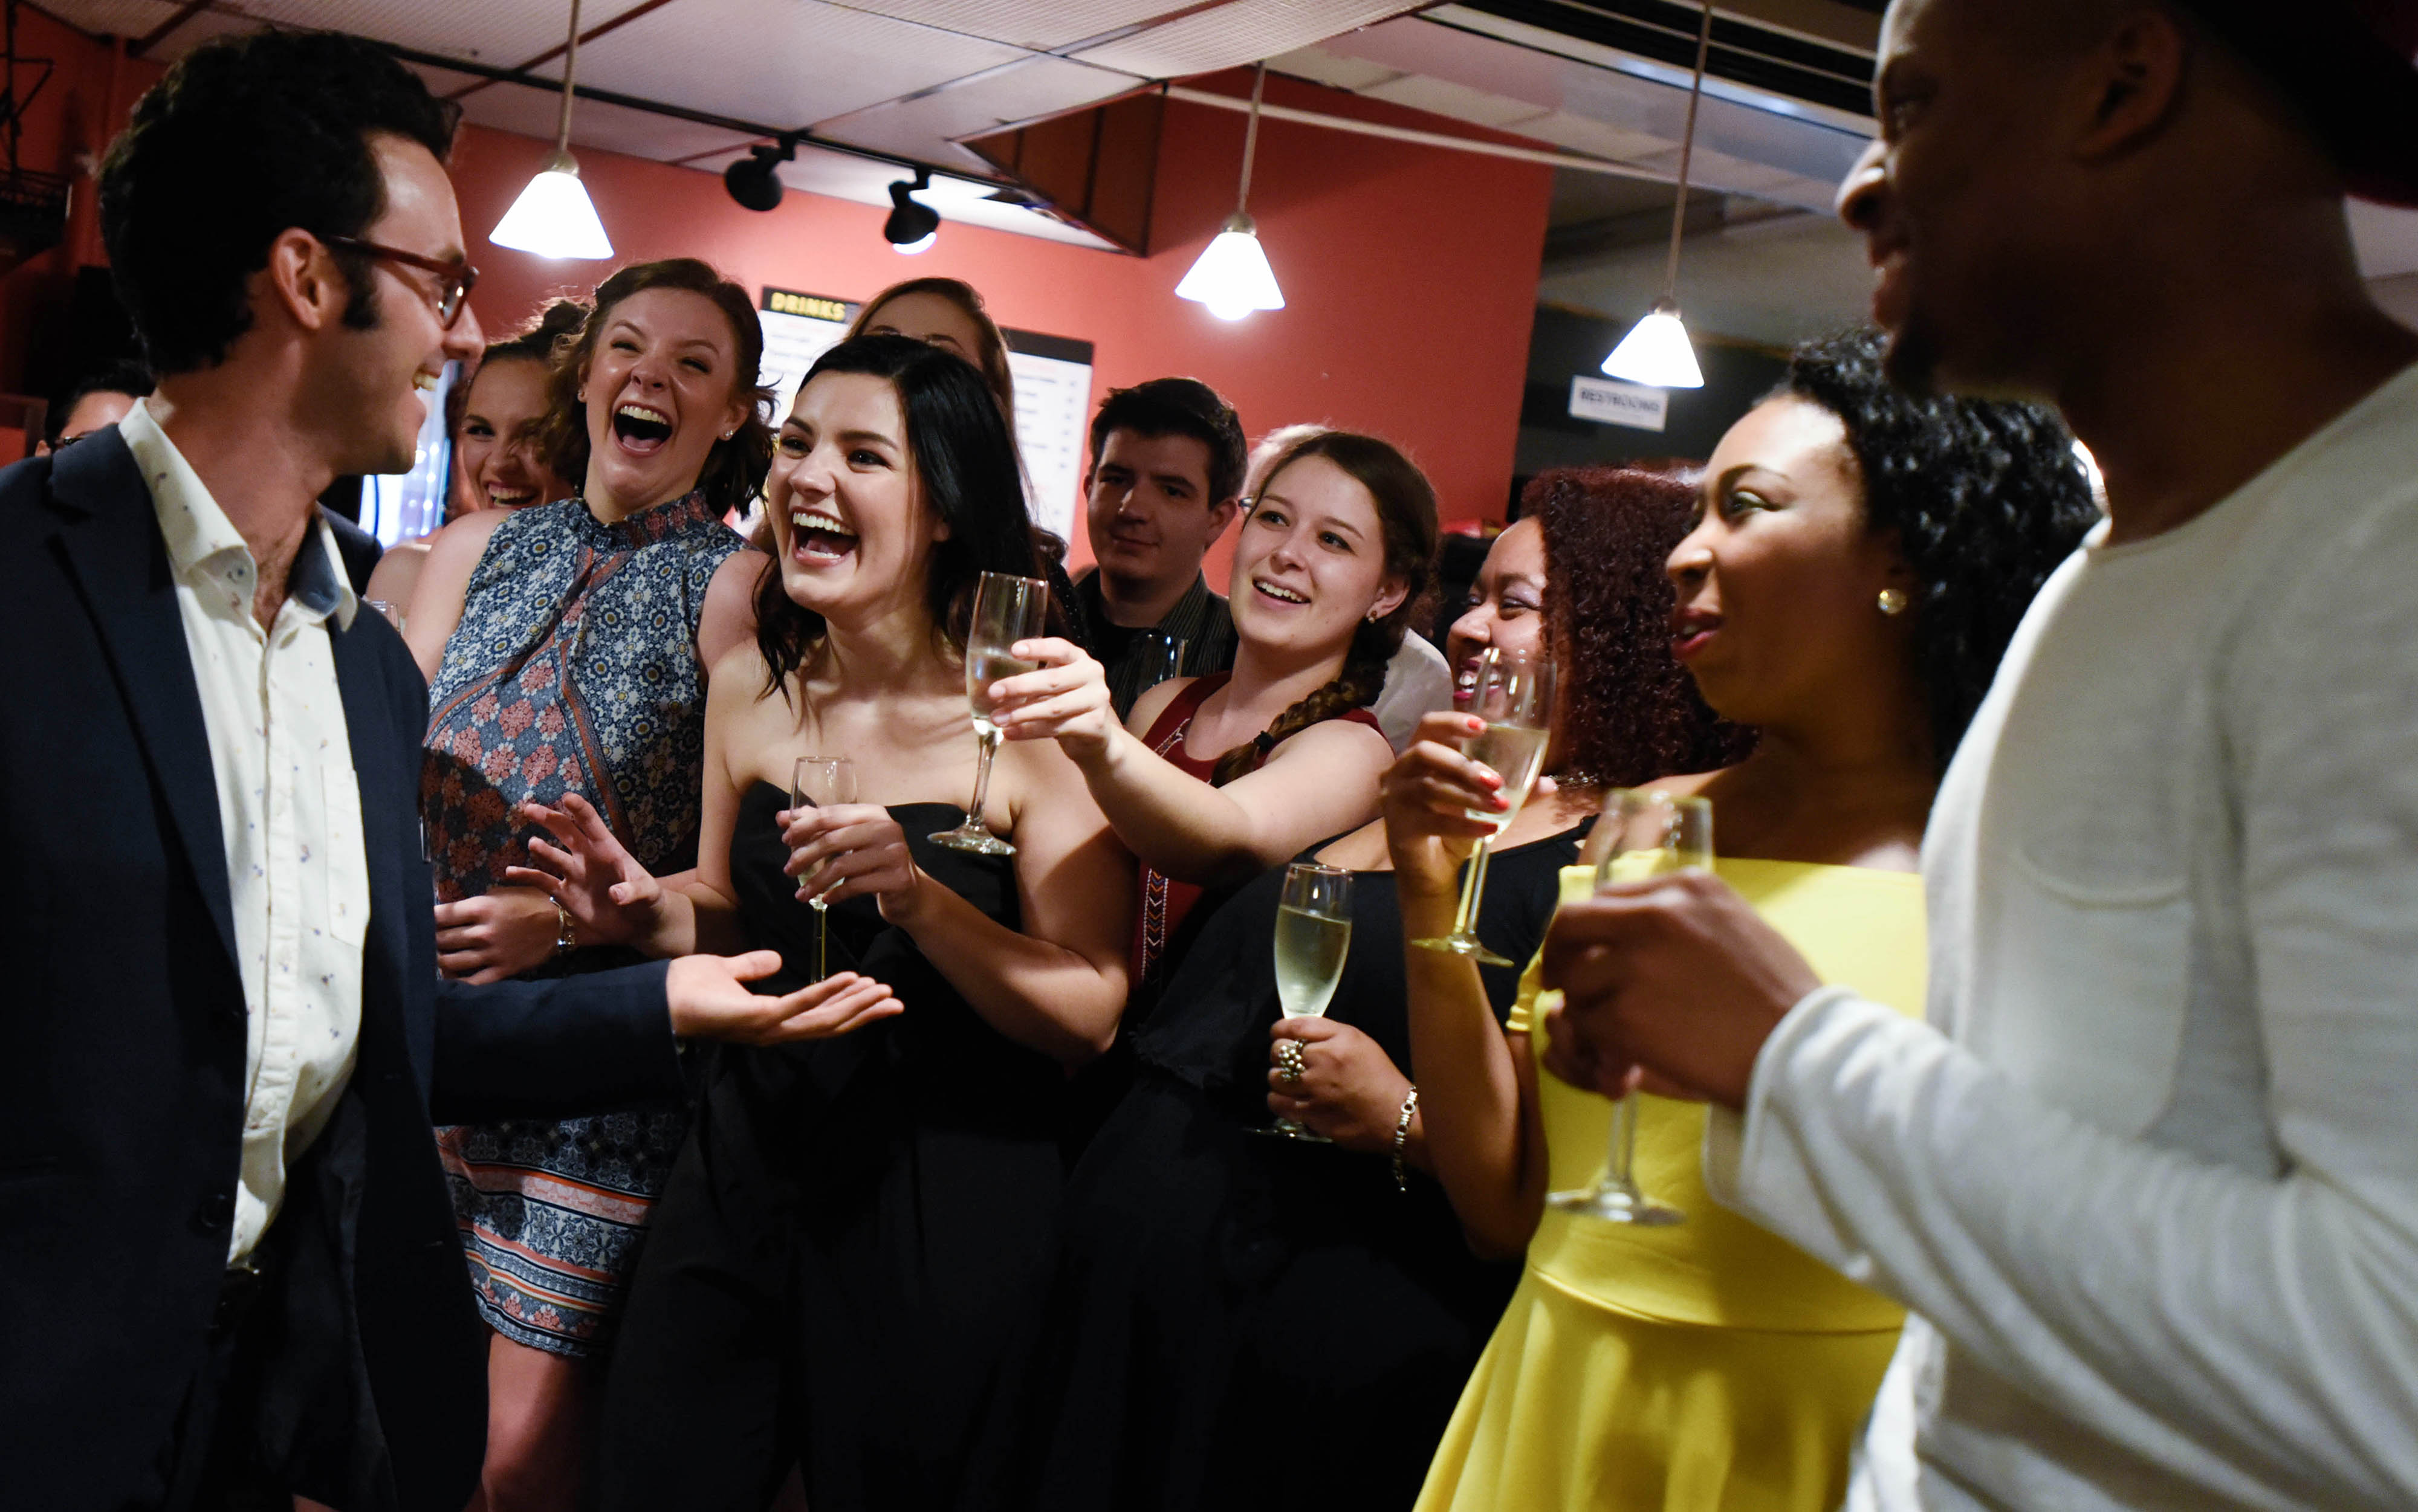 Mamma Mia! cast and crew members gather for a champagne toast after the show on the opening night of Mamma Mia! at theREP in Albany Tuesday, July 11, 2017.